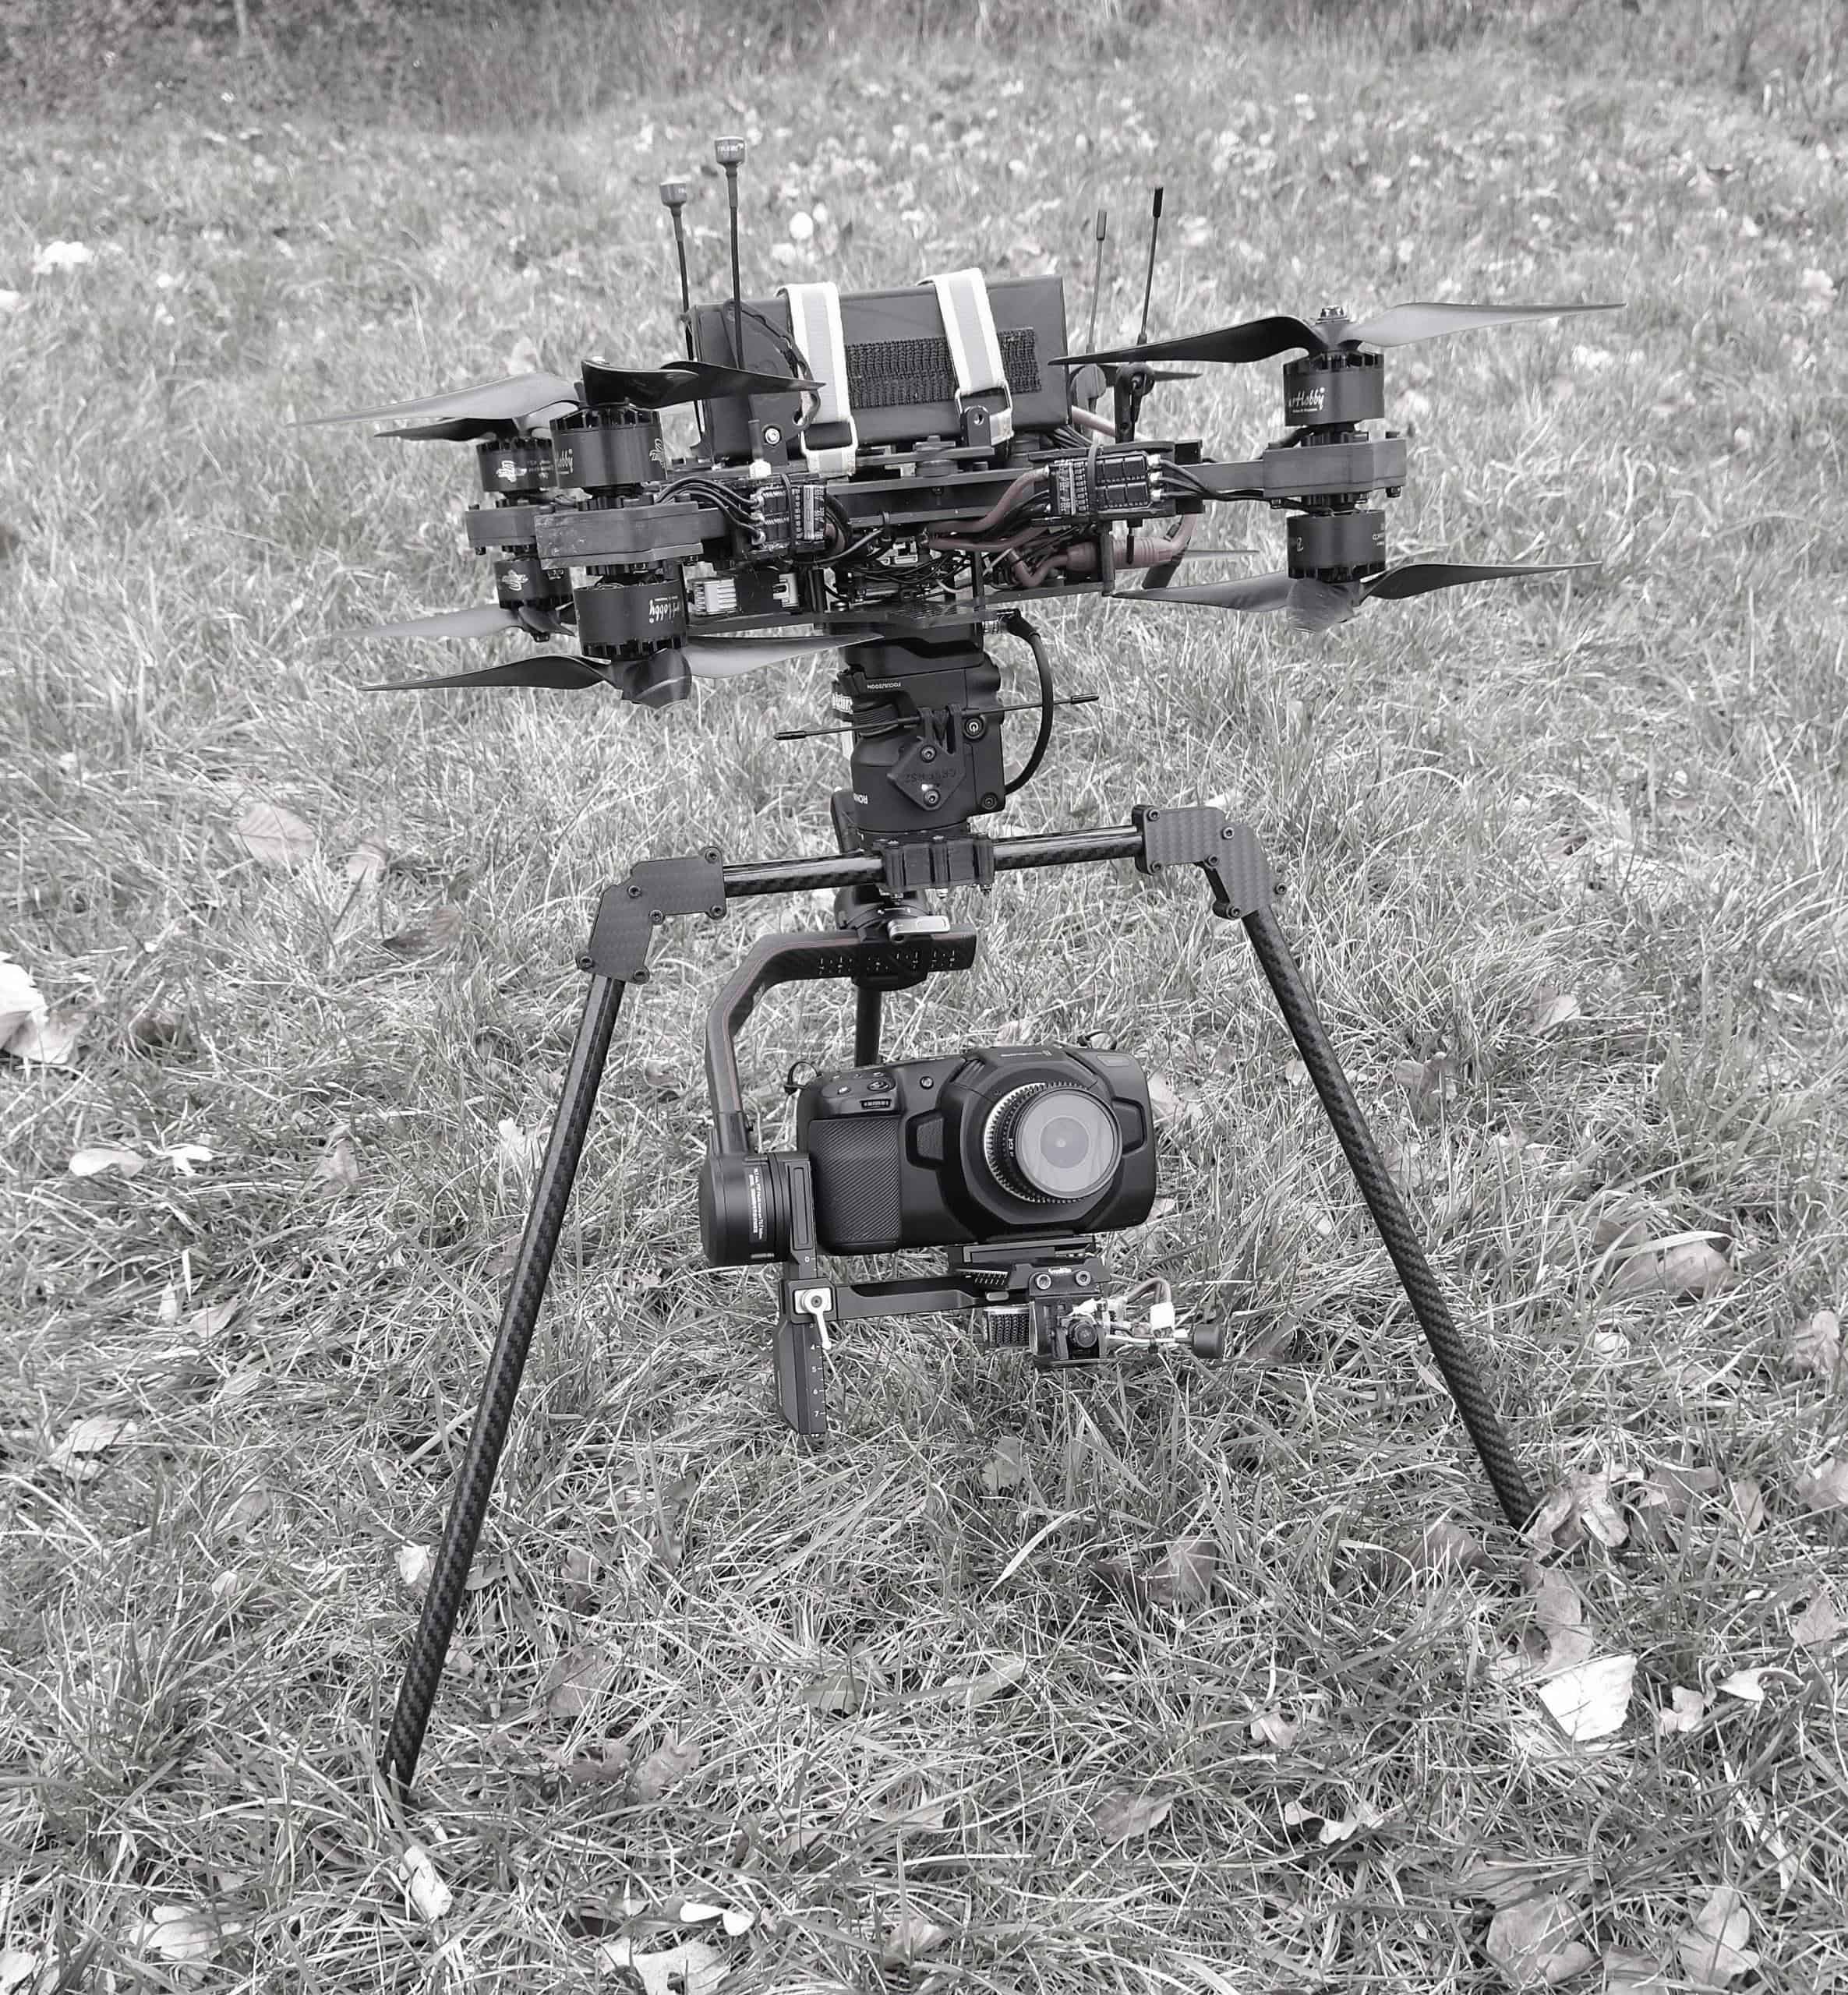 3 axis gimbal - dual operator FPV setup FPV drone videography from Belgium